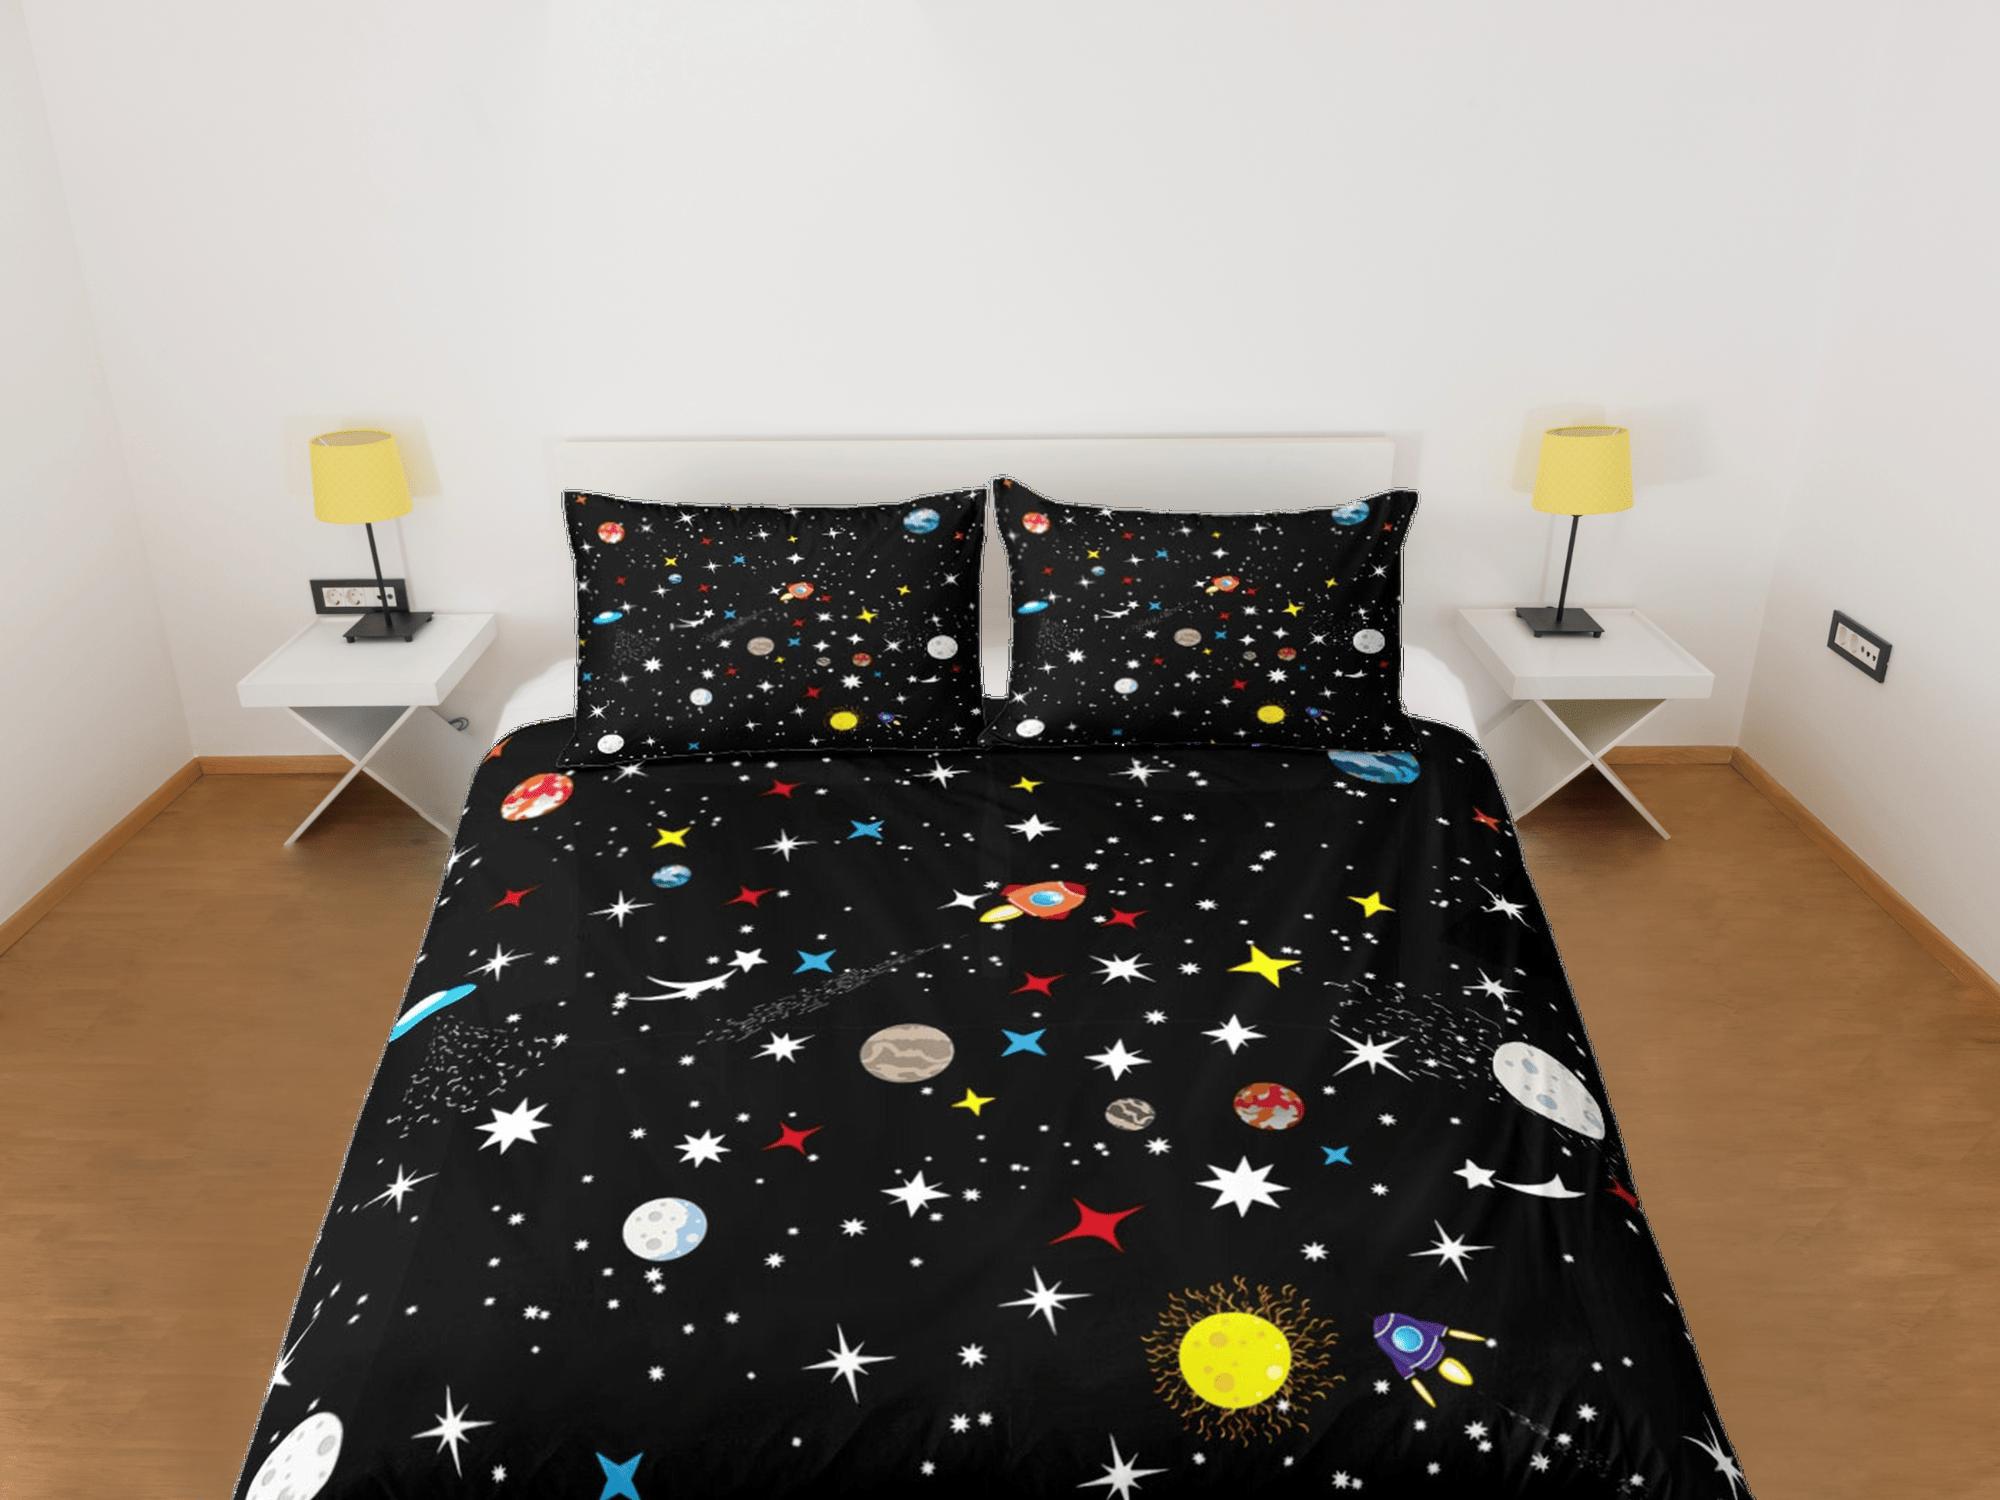 daintyduvet Planets Galaxy Black Duvet Cover Set Bedspread, Teens Kids Bedding with Pillowcase